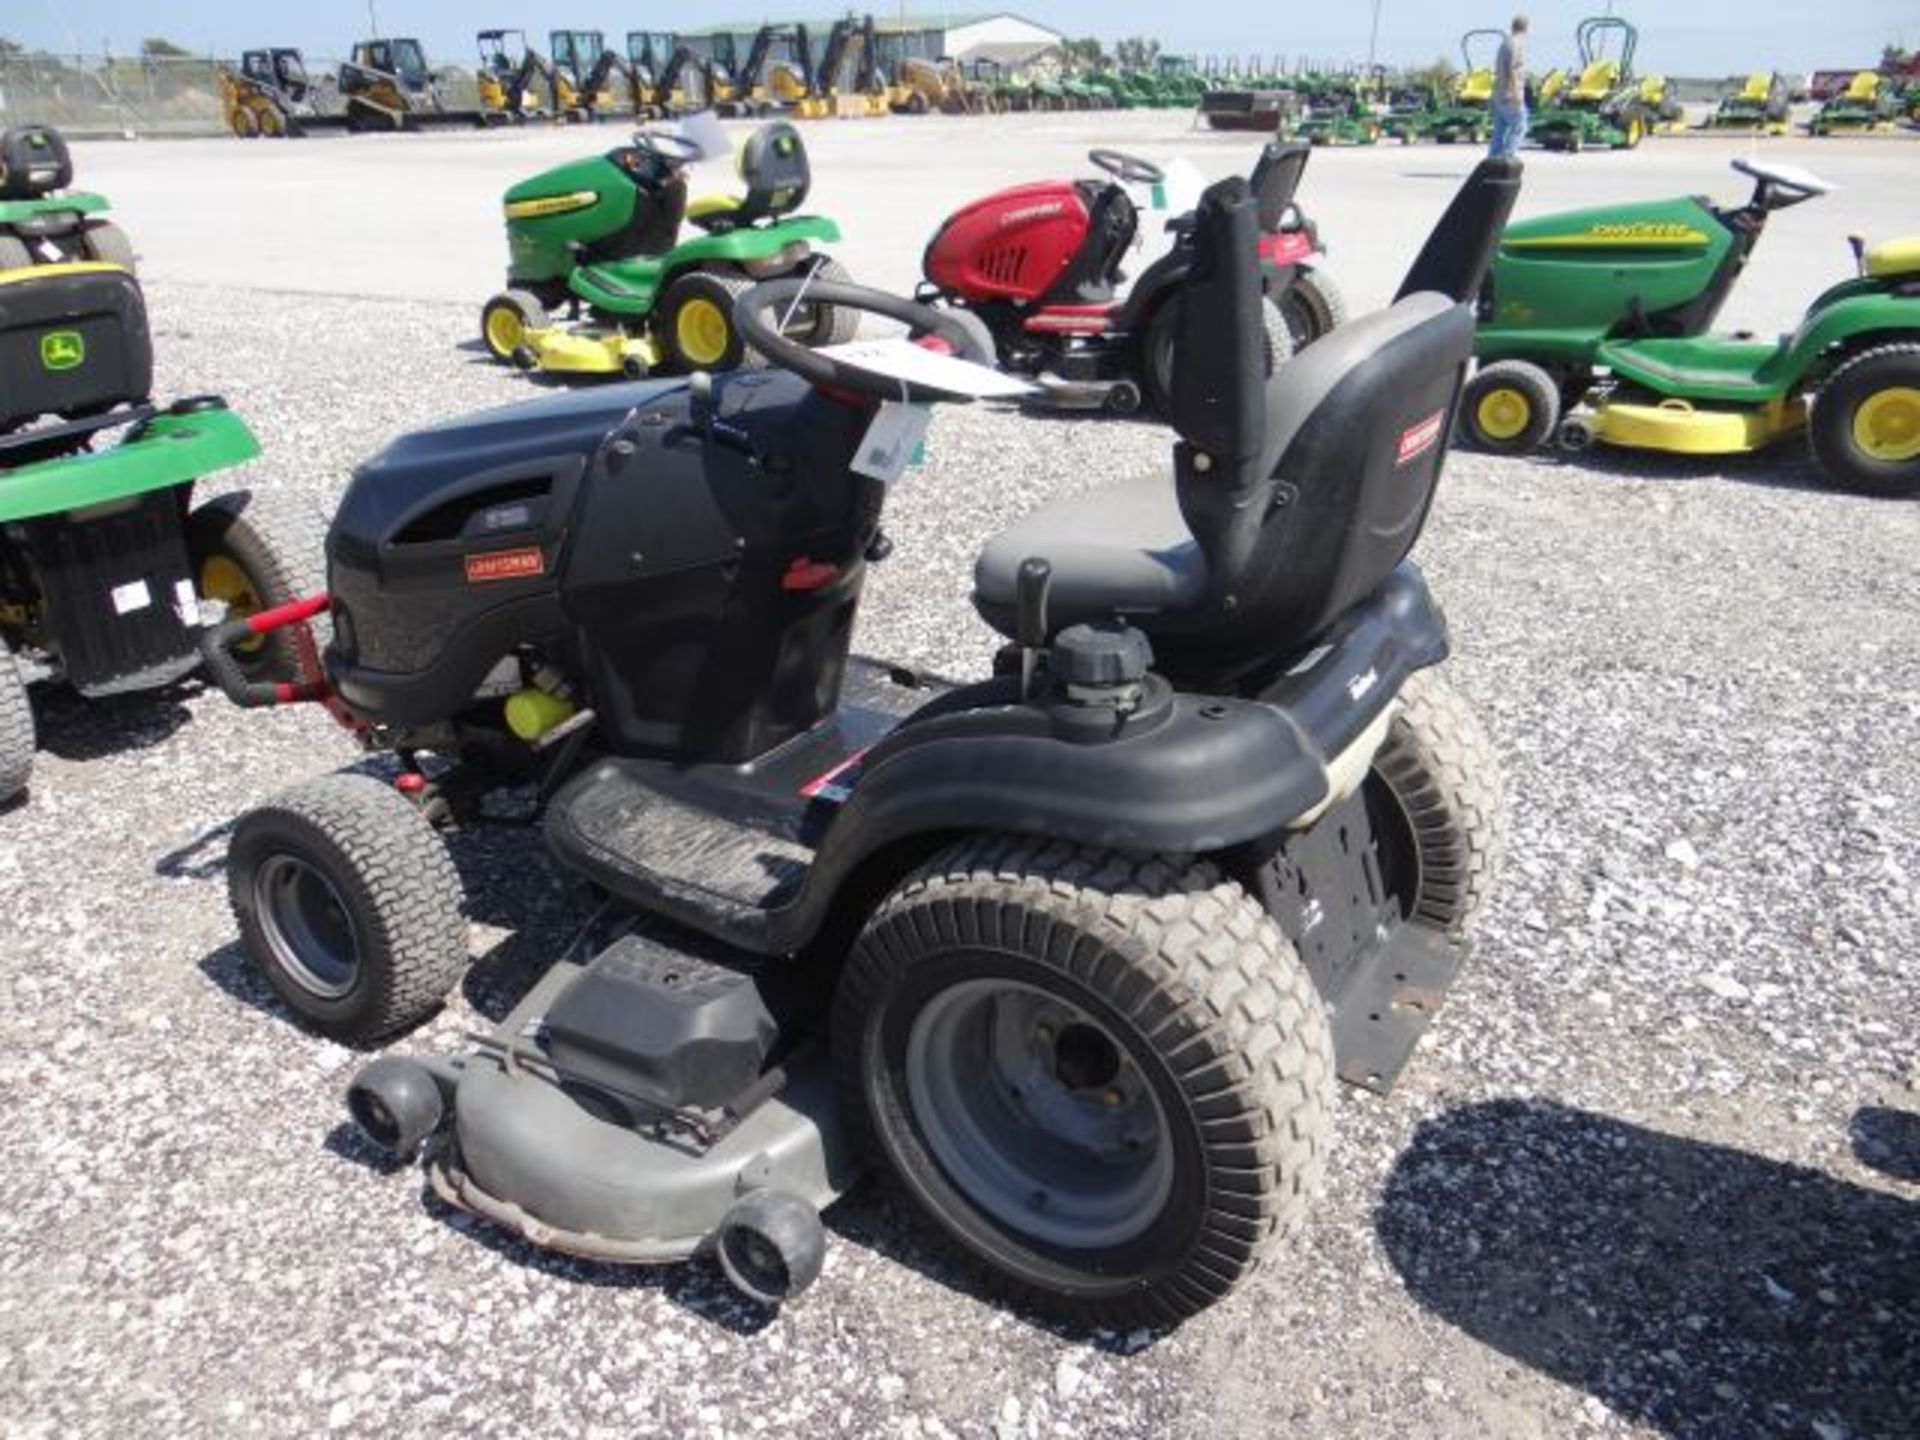 Craftsman GT6000 Mower 357 Hrs, 26 HP Kolher, Air Cooled, Hydro, 54"